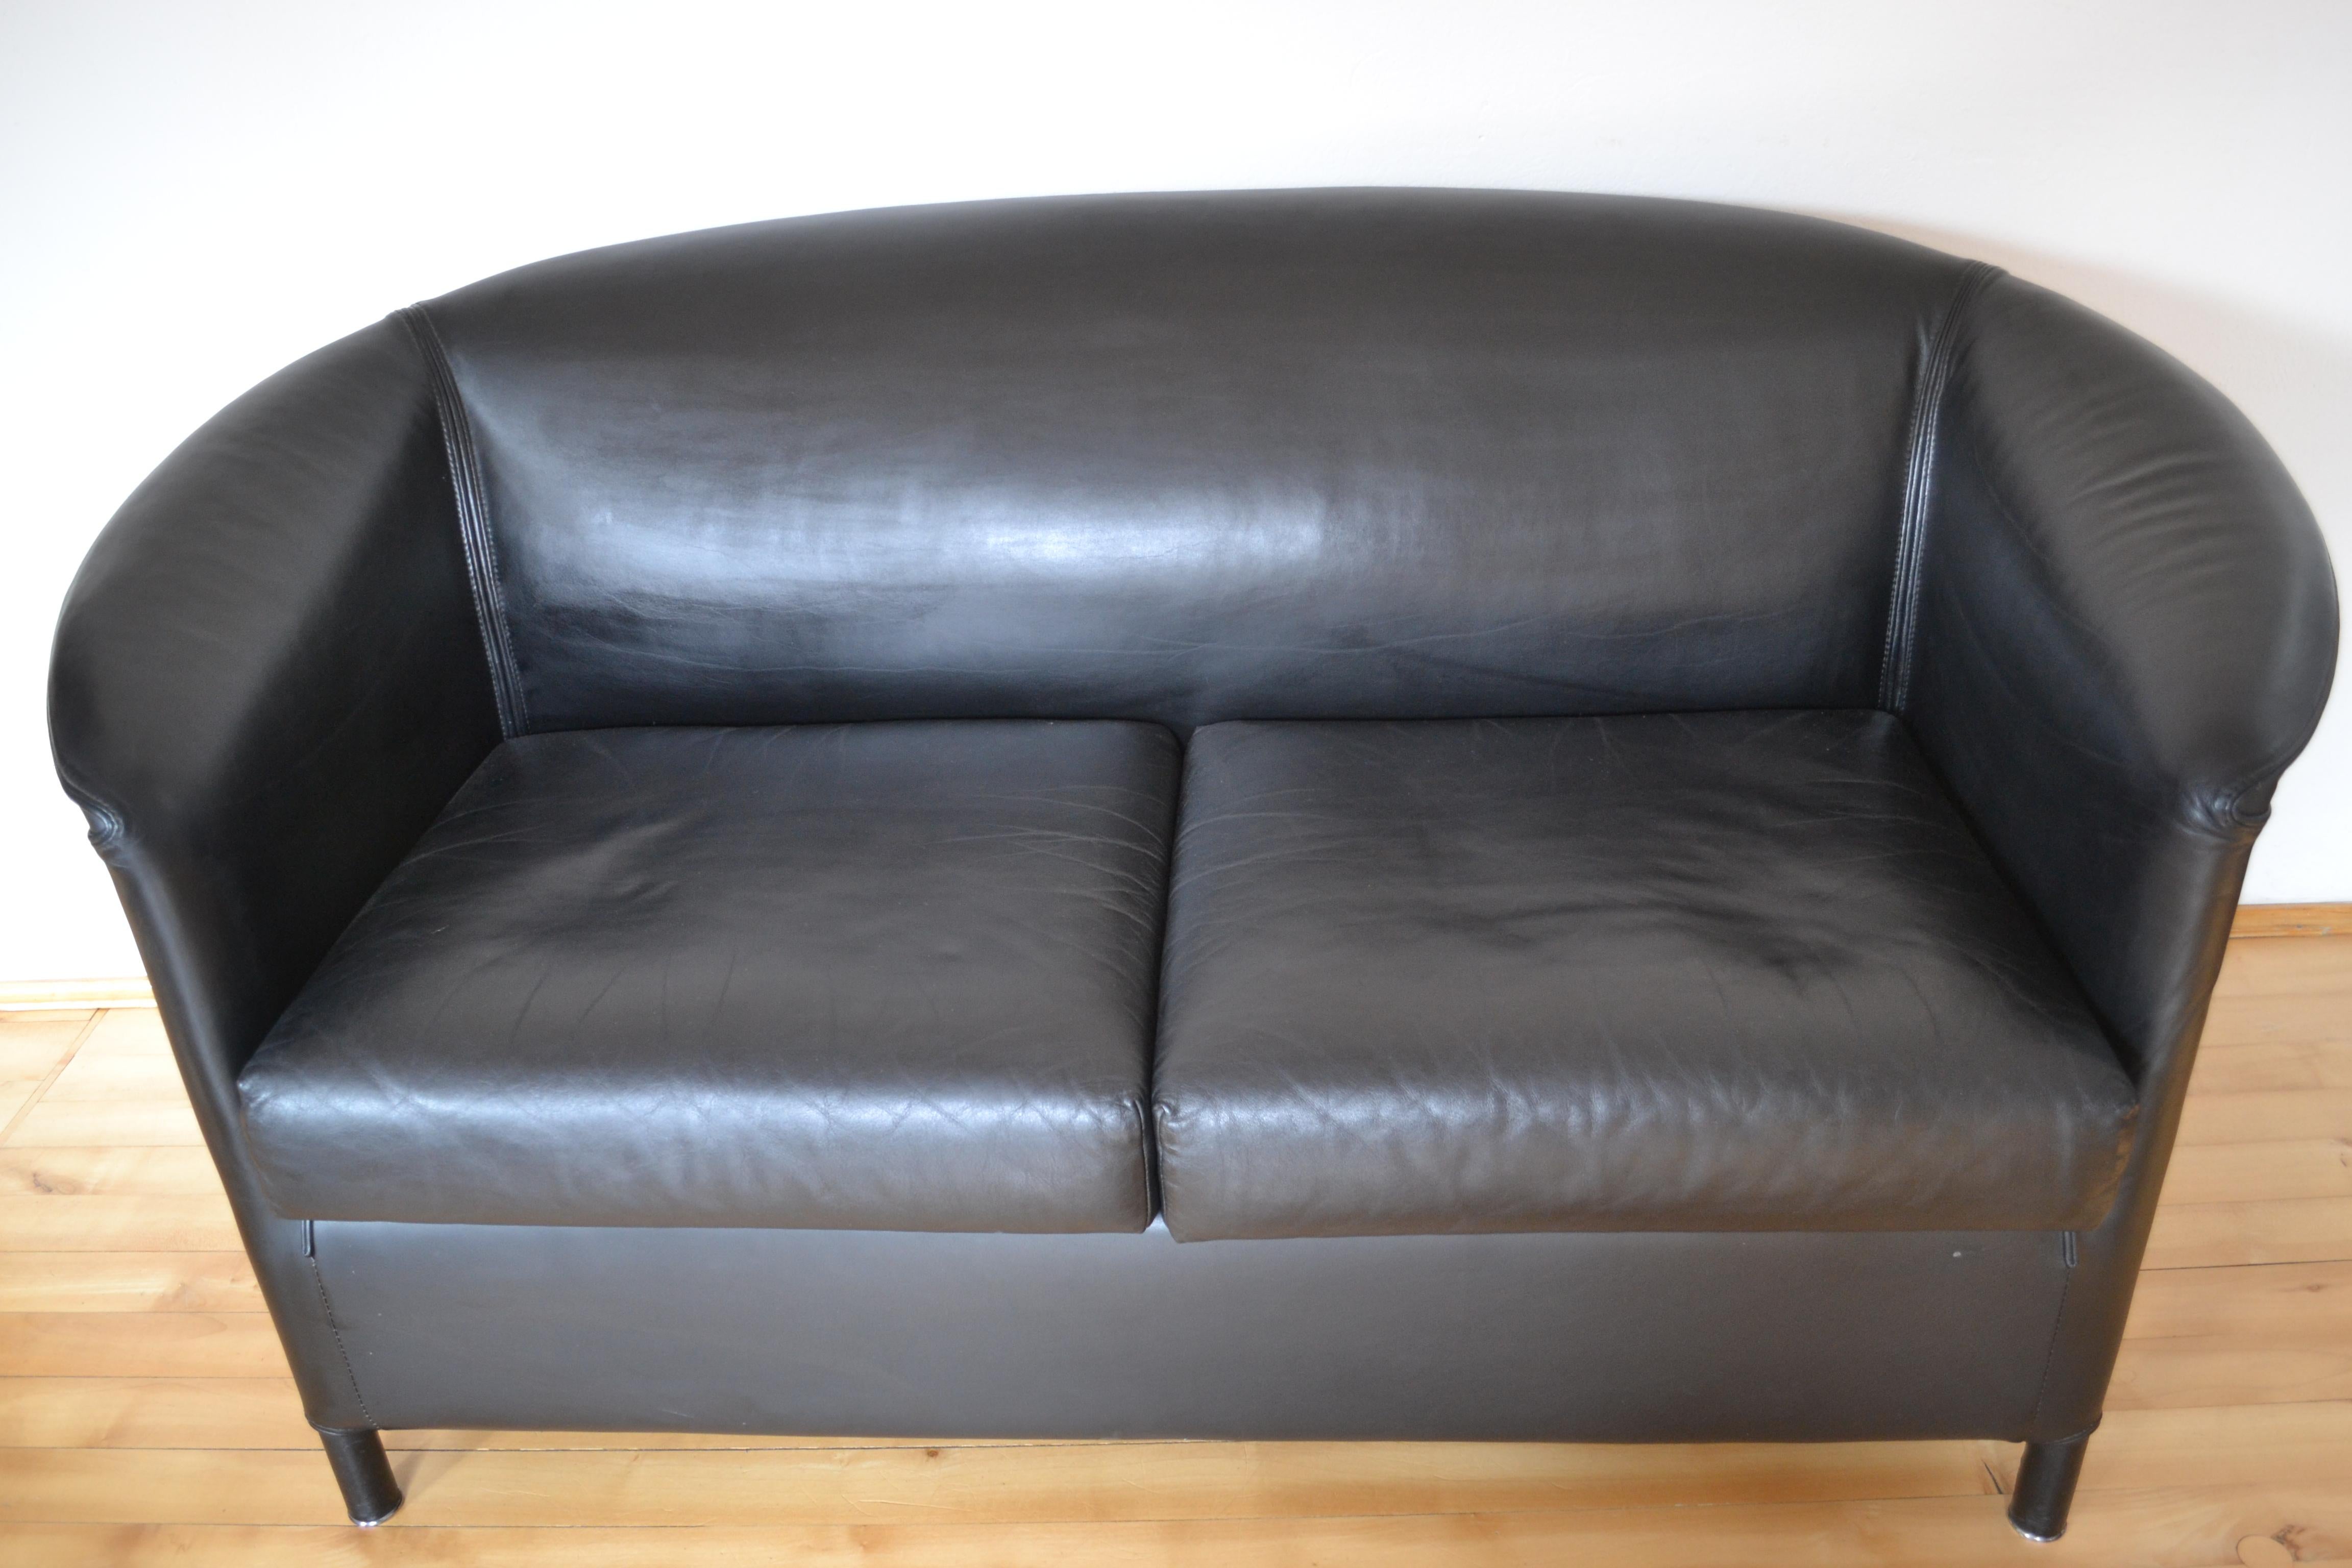 Aura sofa, designed by Paolo Piva, Wittmann, Austria, from the 1980s fully original, signed. Sofa made of high-quality natural leather. Attractive form and very good performance.